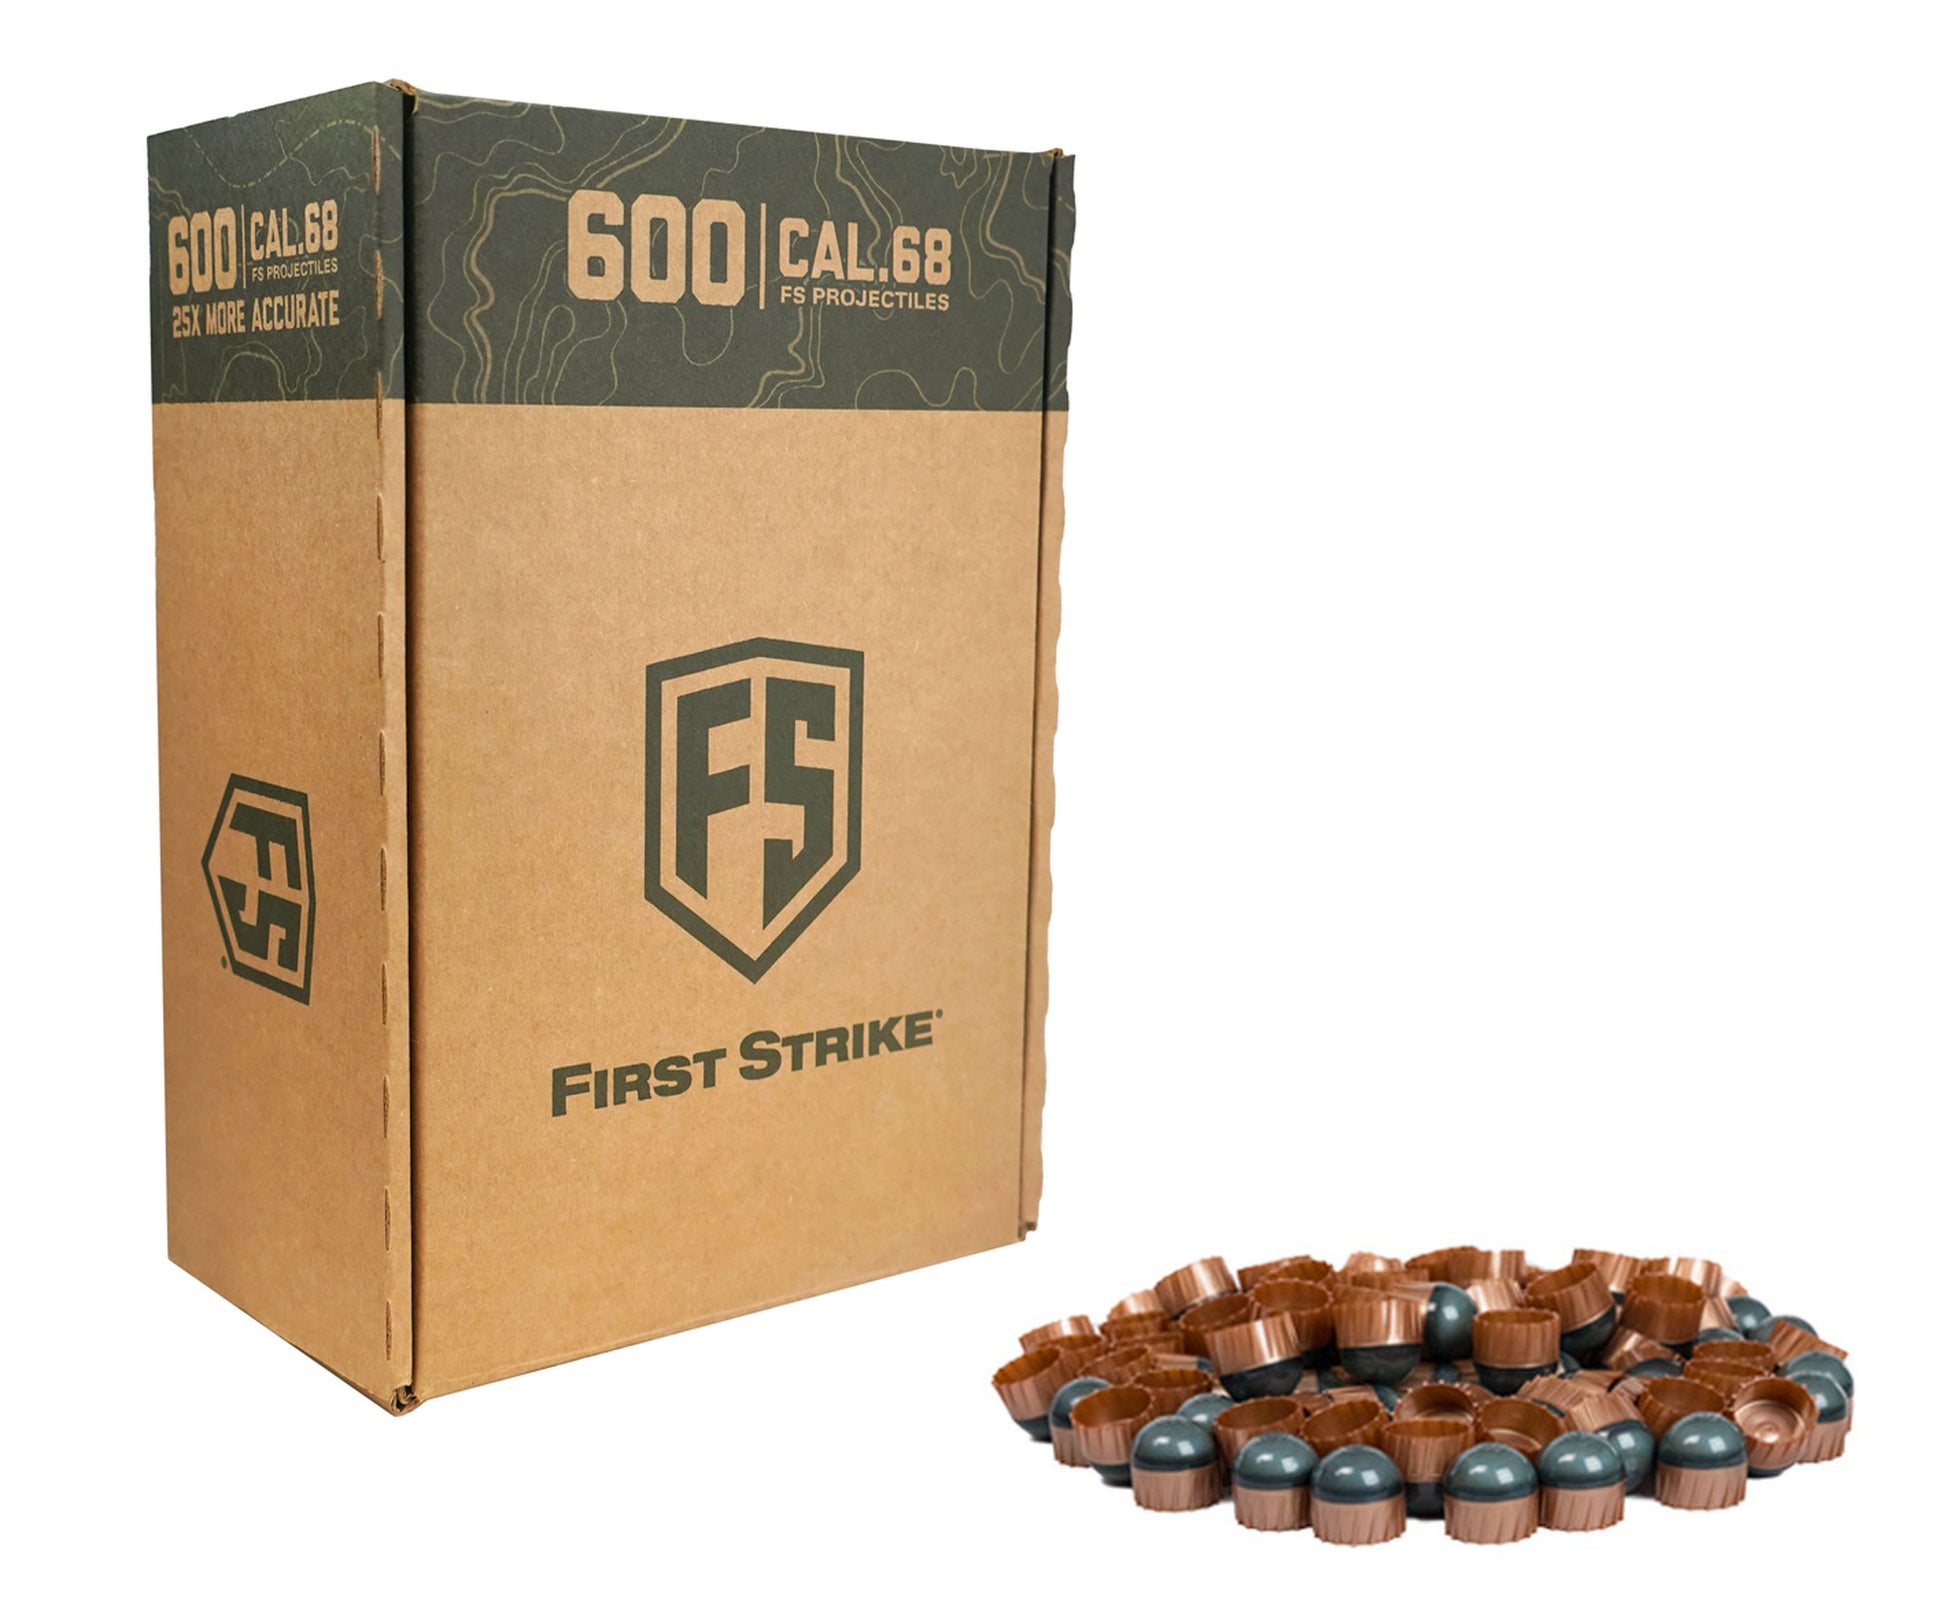 First Strike Rounds - 600 Count - Smoke/Copper - Blue Fill - First Strike